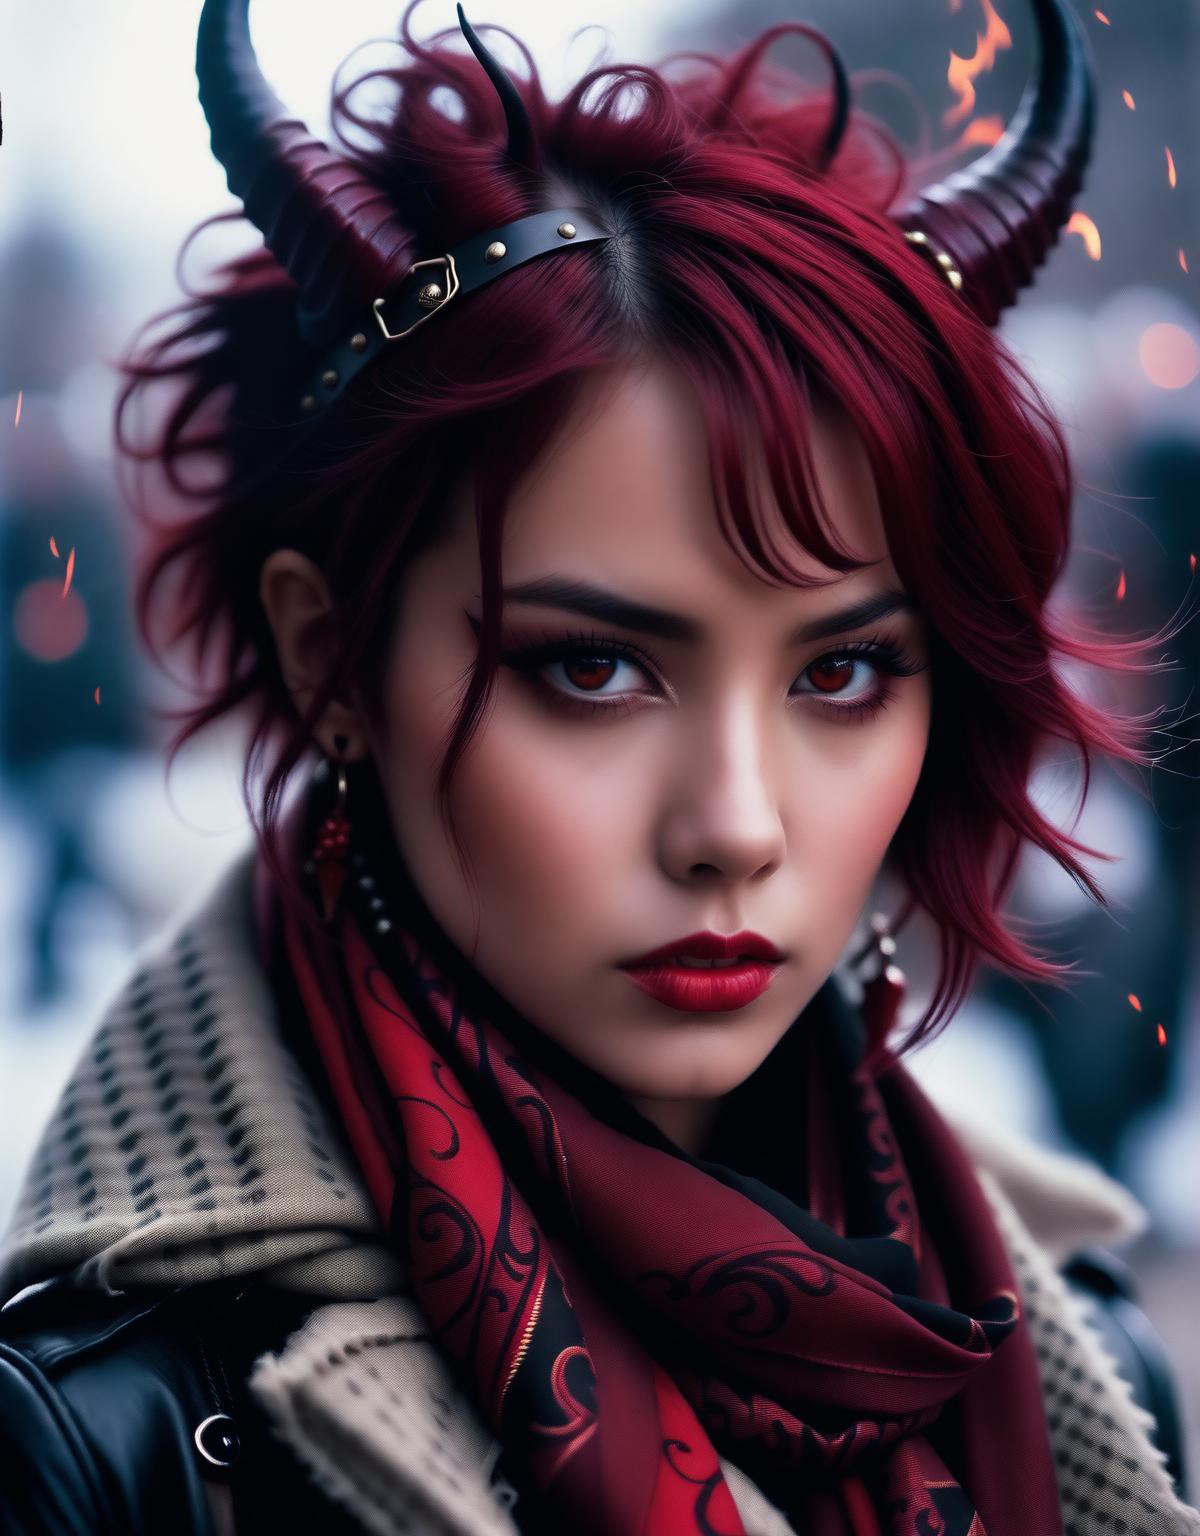 photograph, punk young_female_demon, red skin tone, (VAE batch), dark eyesLight hair styled as Wavy, Horns, Scarf, Lonely,...